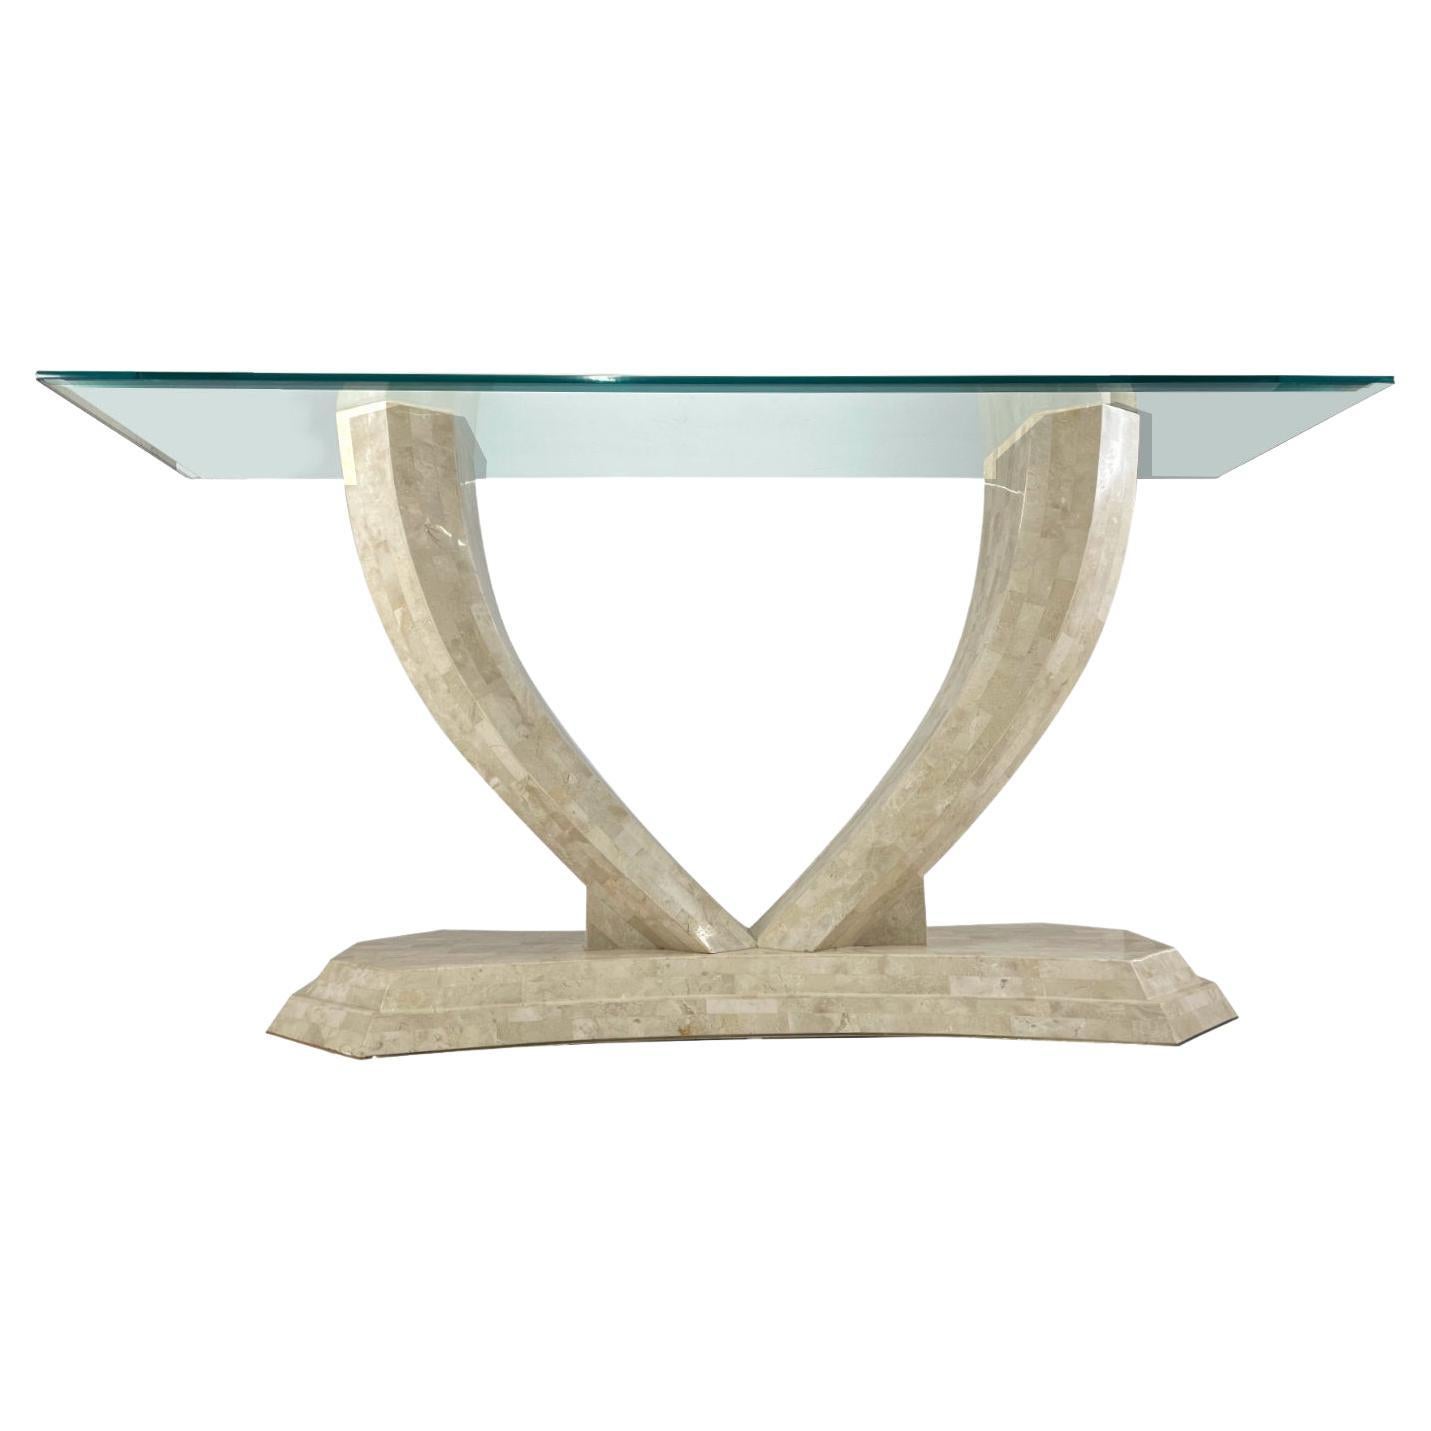 Robert Marcius for Maitland Smith Arched Tessellated Stone Console Table